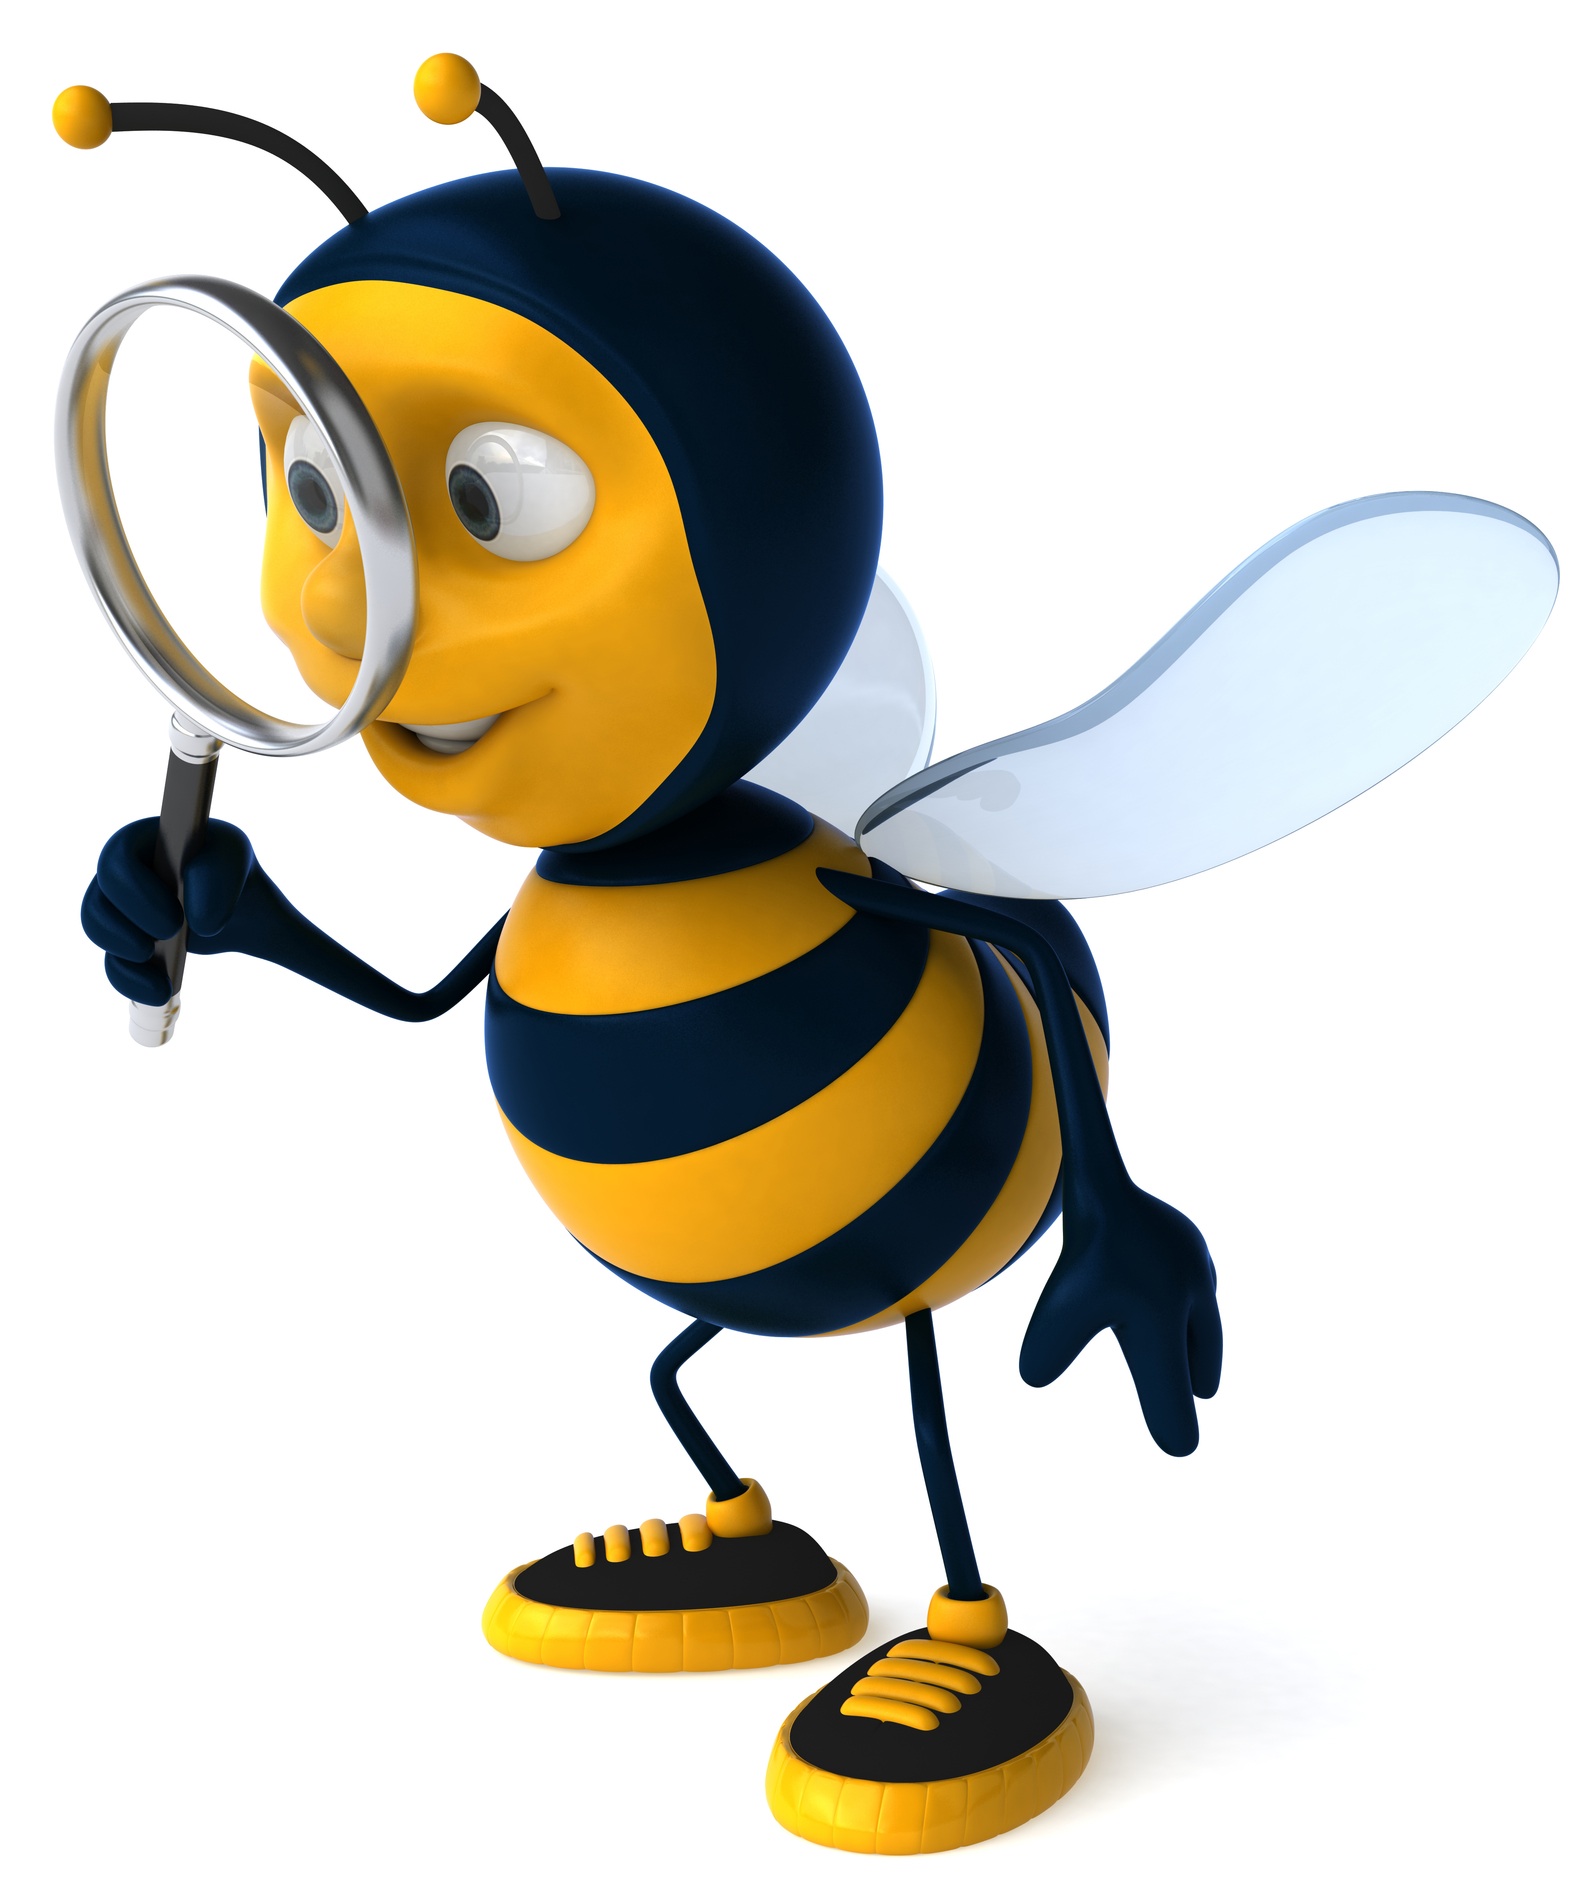 Cartoon Bumble Bee Images - ClipArt Best